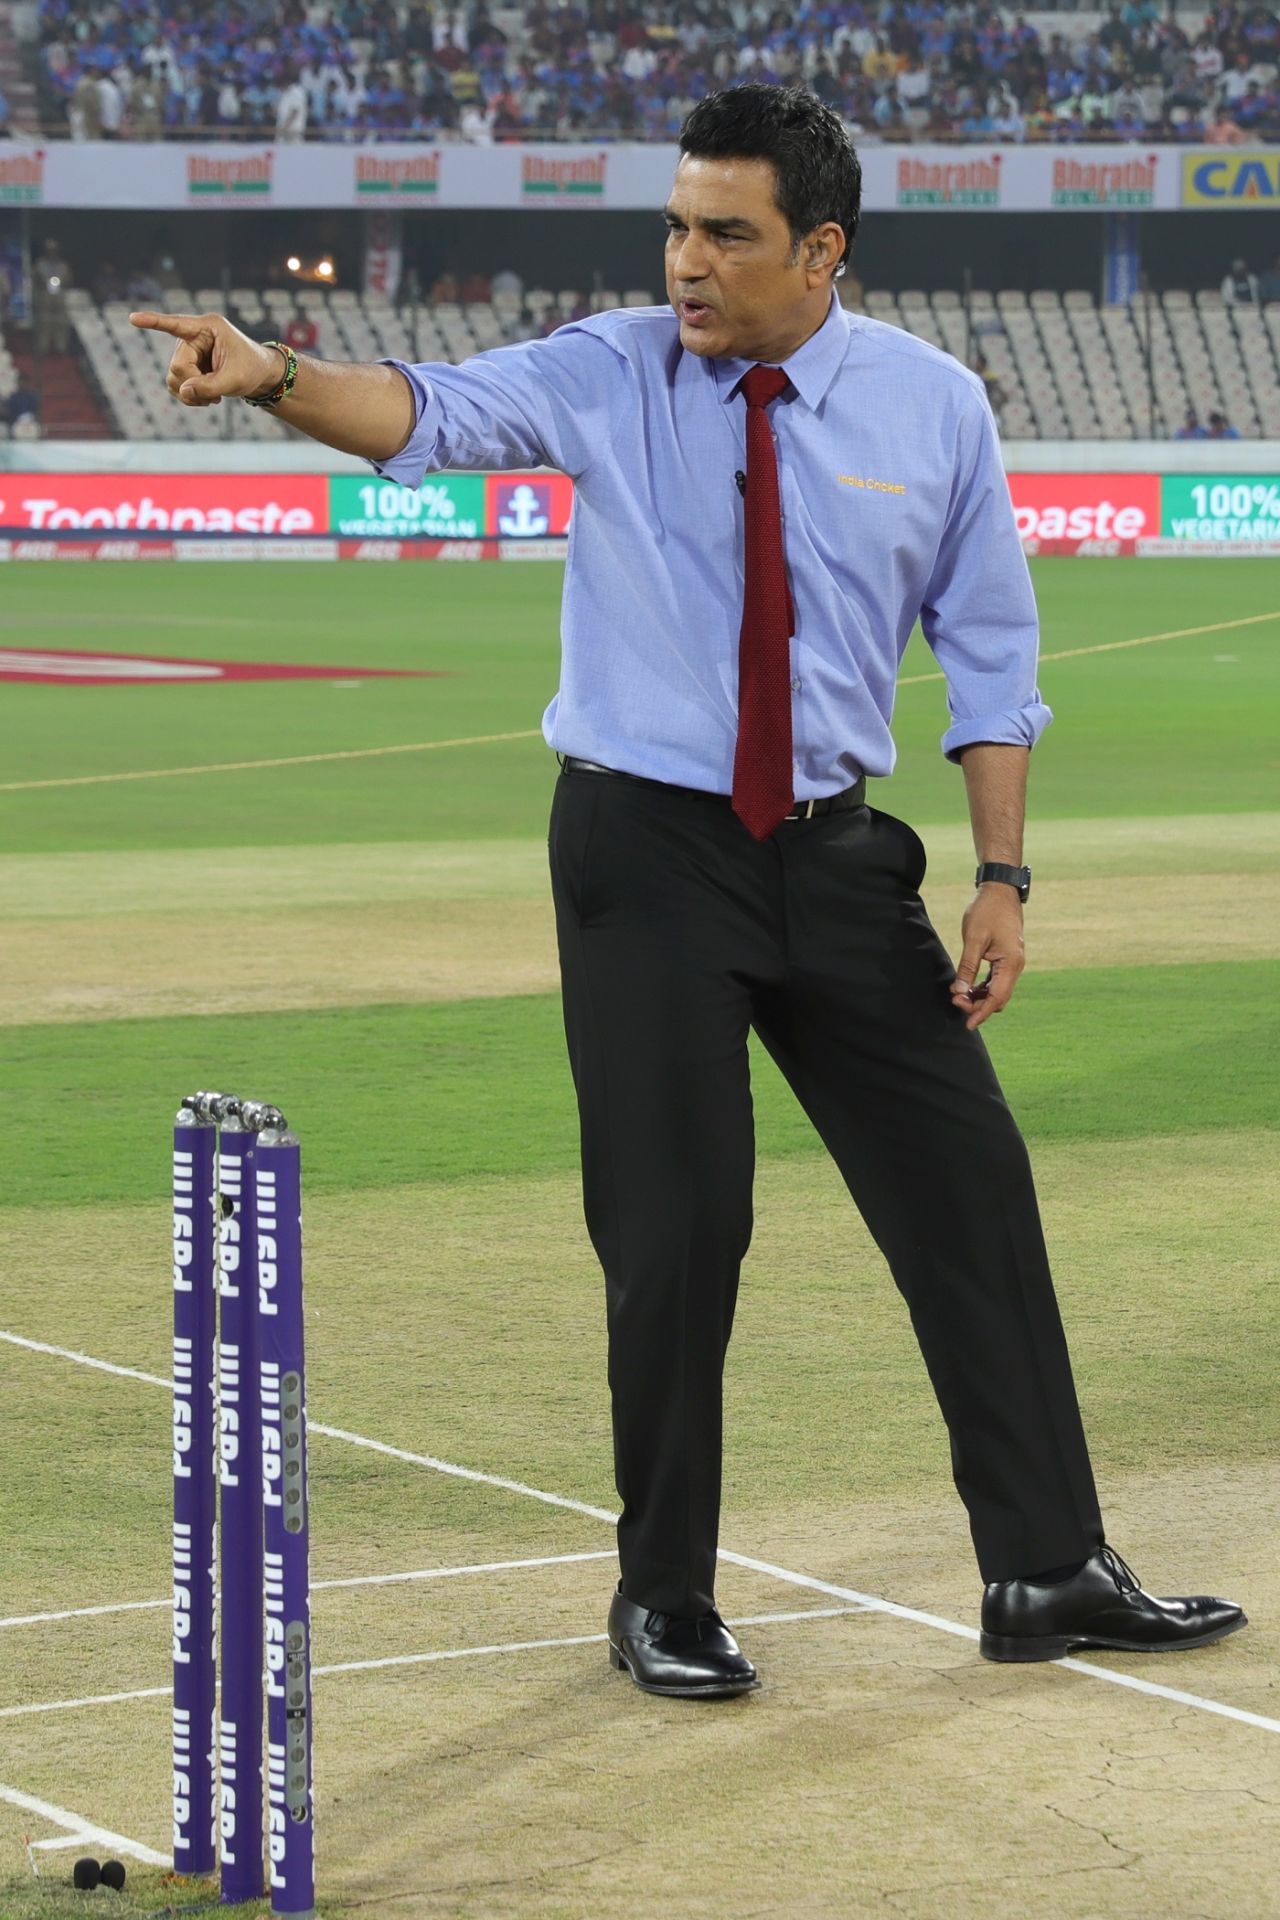 Sanjay Manjrekar before the start of the first T20I between India and West Indies, Hyderabad, December 6, 2019